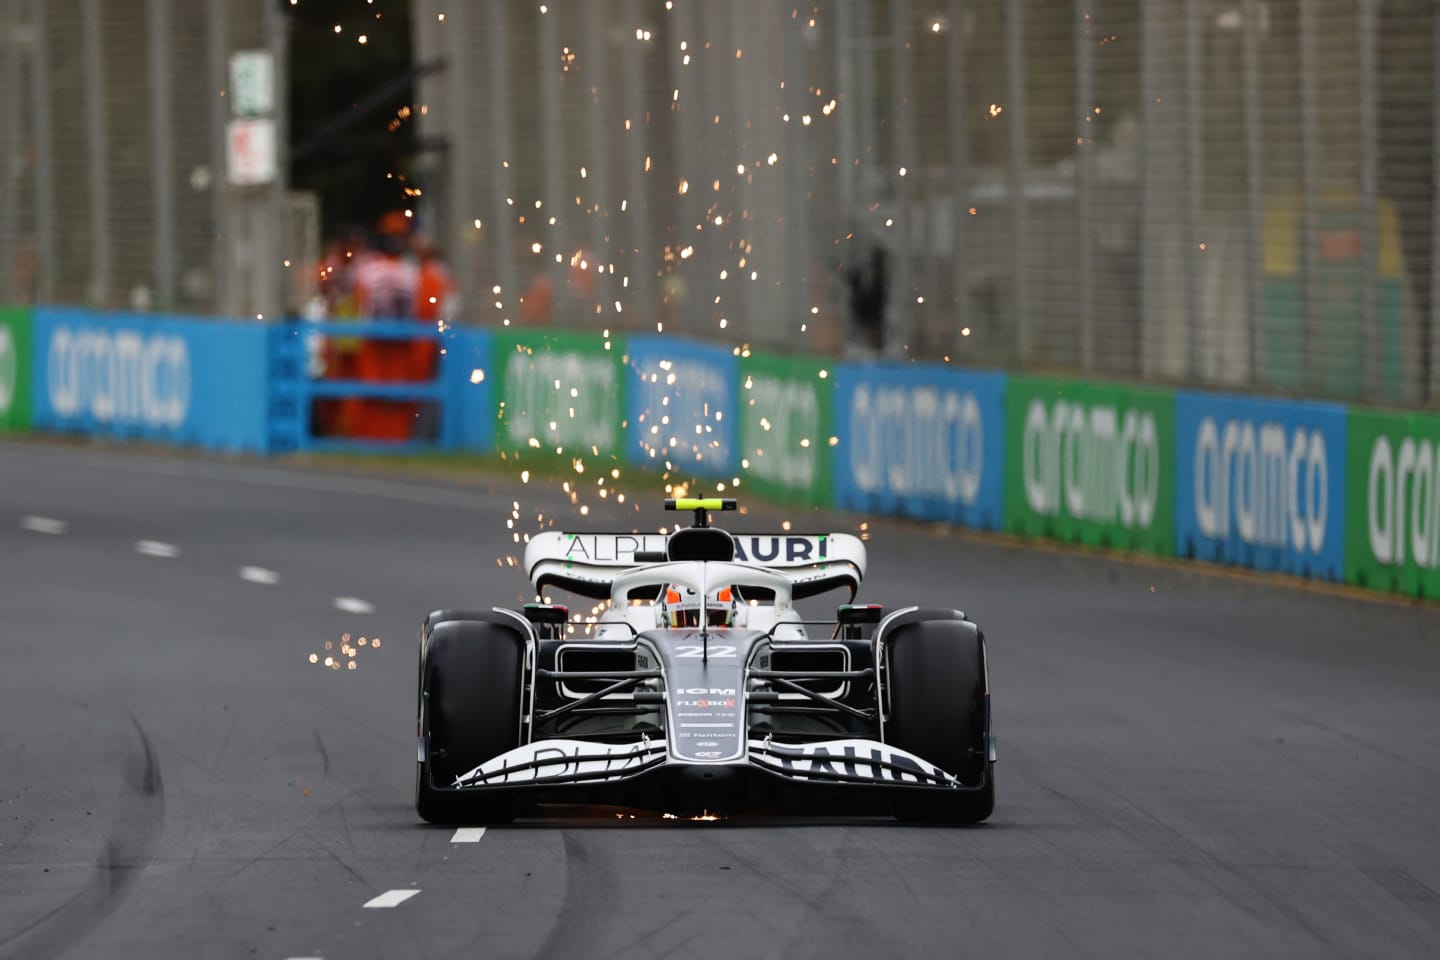 MELBOURNE, AUSTRALIA - APRIL 08: Sparks fly behind Yuki Tsunoda of Japan driving the (22) Scuderia AlphaTauri AT03 on track during practice ahead of the F1 Grand Prix of Australia at Melbourne Grand Prix Circuit on April 08, 2022 in Melbourne, Australia. (Photo by Robert Cianflone/Getty Images)